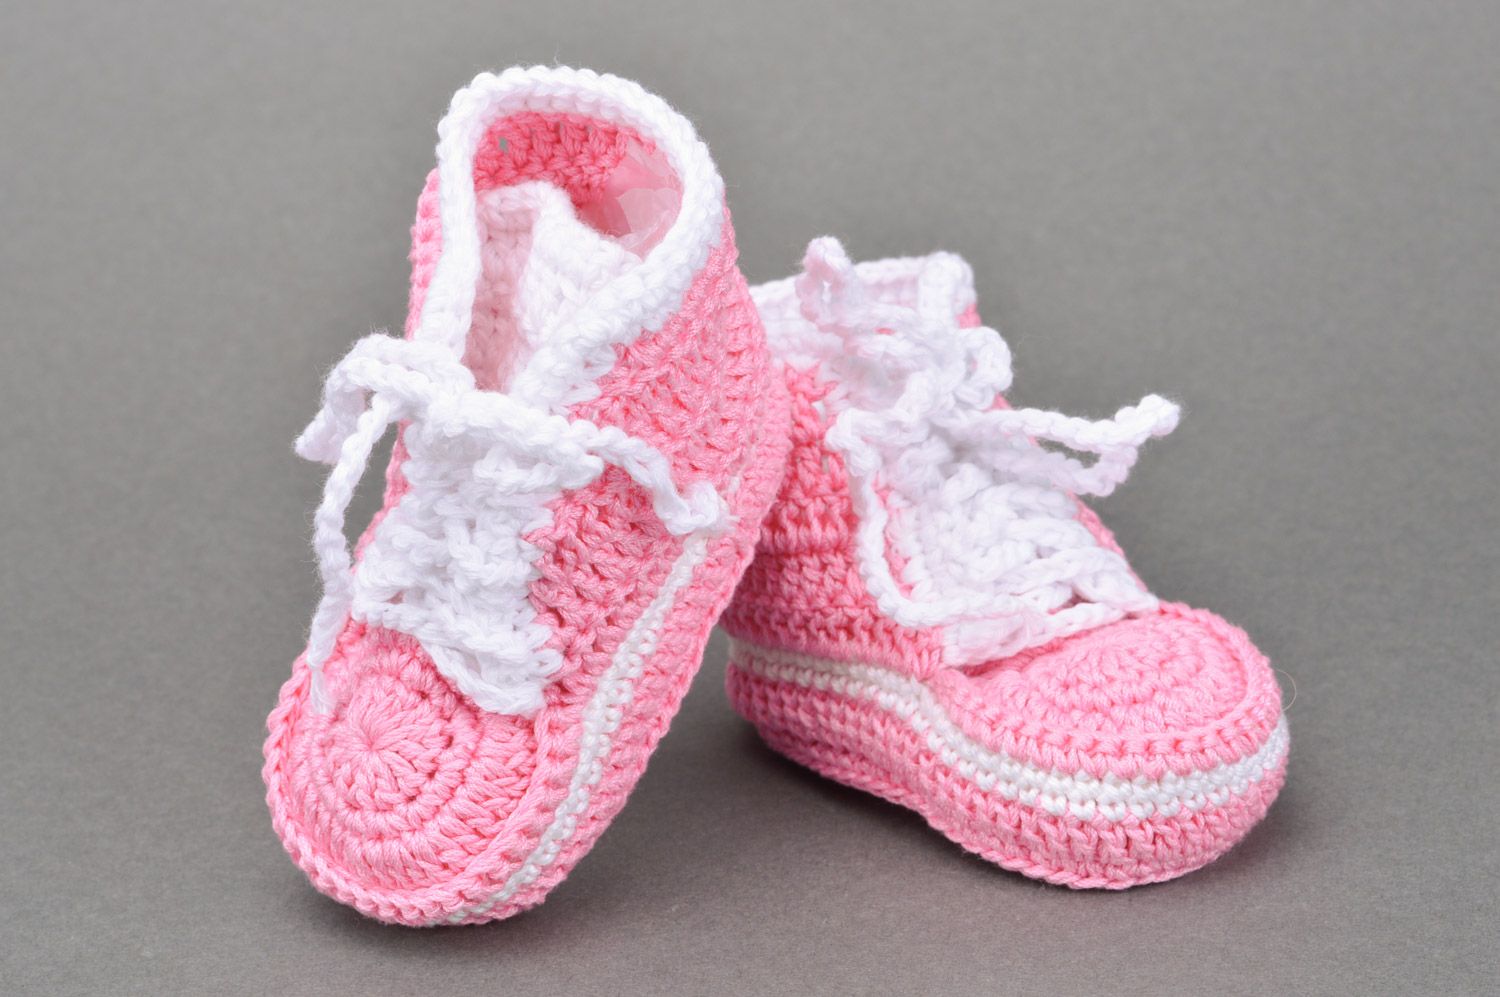 Handmade crocheted pink booties made of cotton in the form of sneakers for girls photo 5